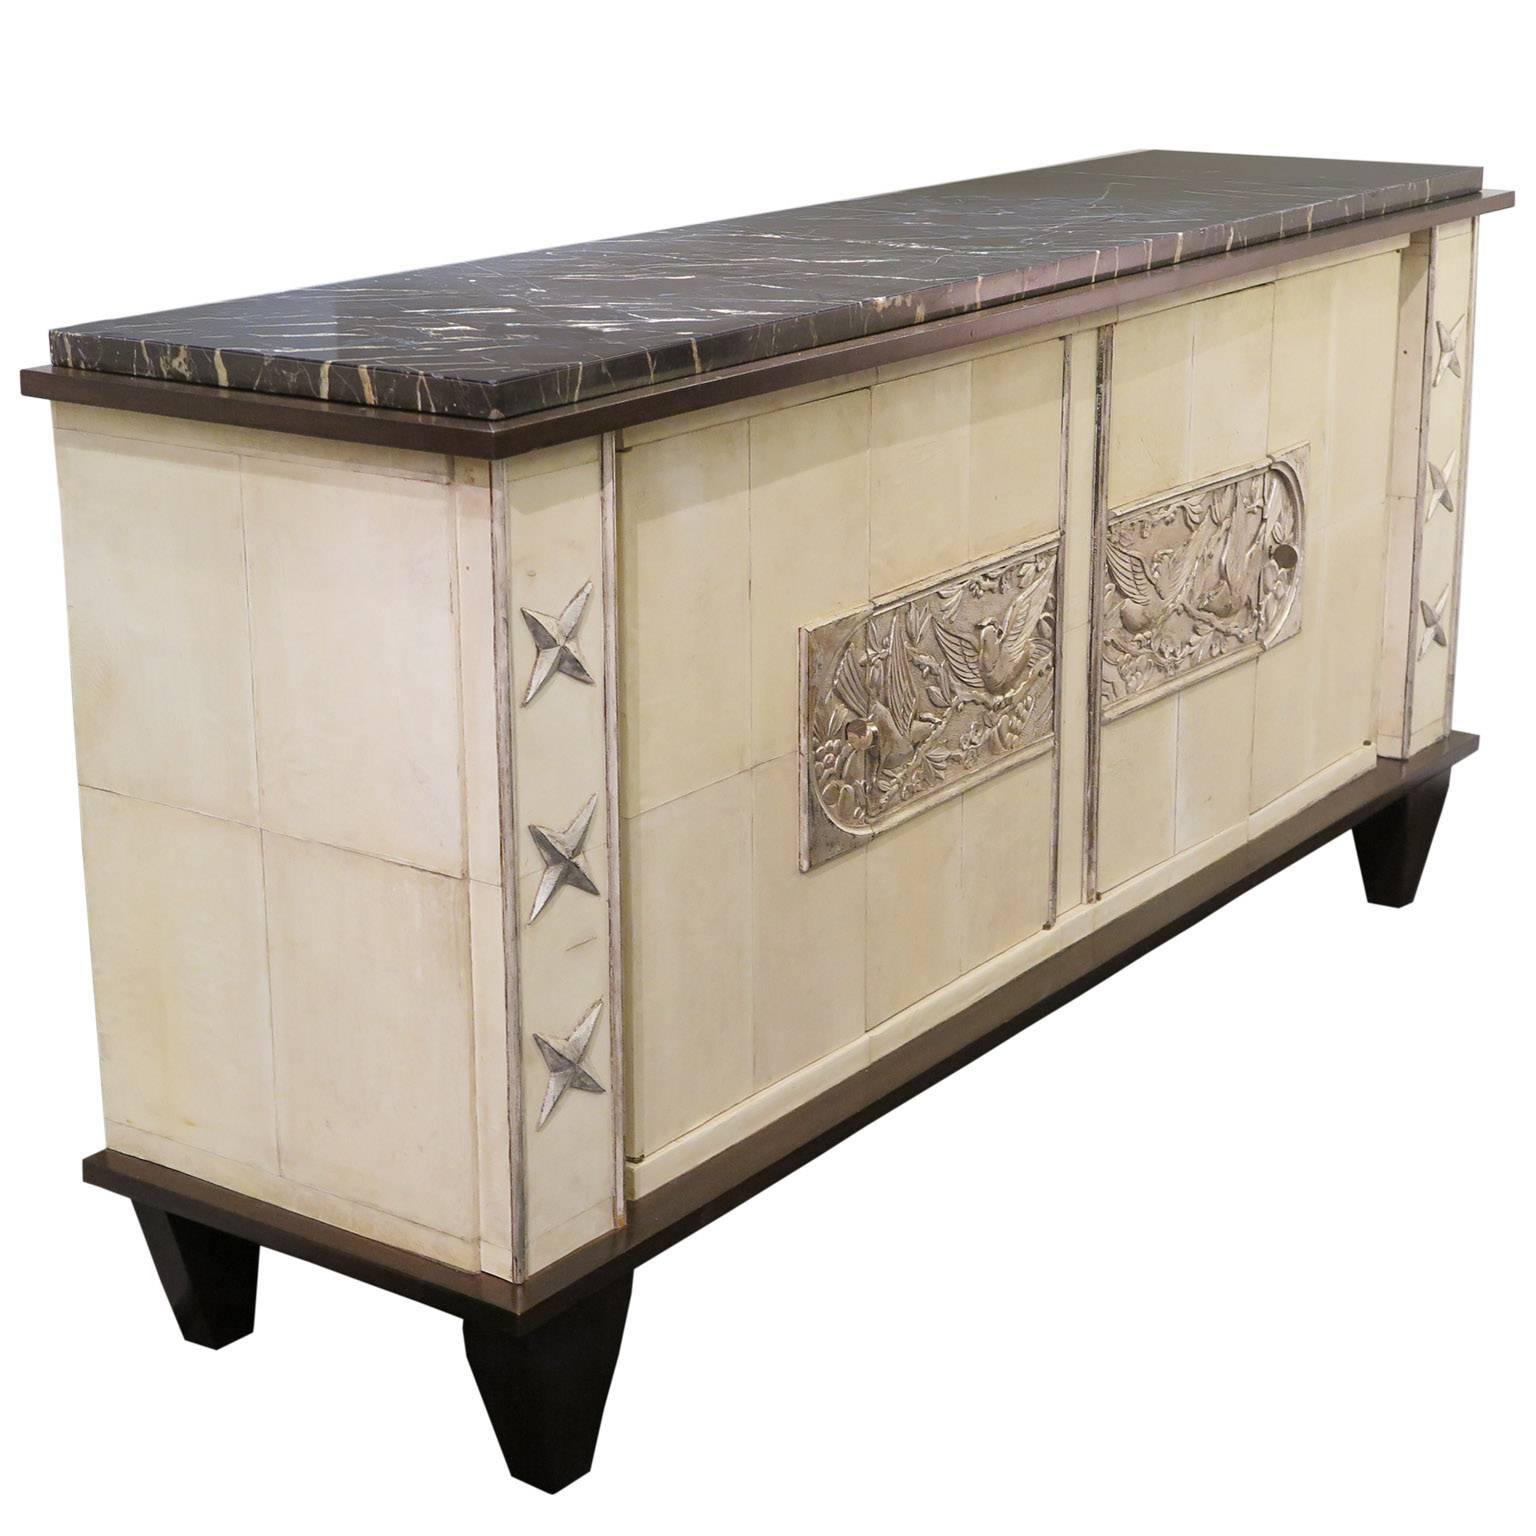 Decorative sideboard with parchment frame and dark mahogany borders and feet. Center relief carving of birds in trees in naturally antiqued silver leaf. Six carved stars in silver leaf decorate the ends of the sideboard. Original marble top. Two